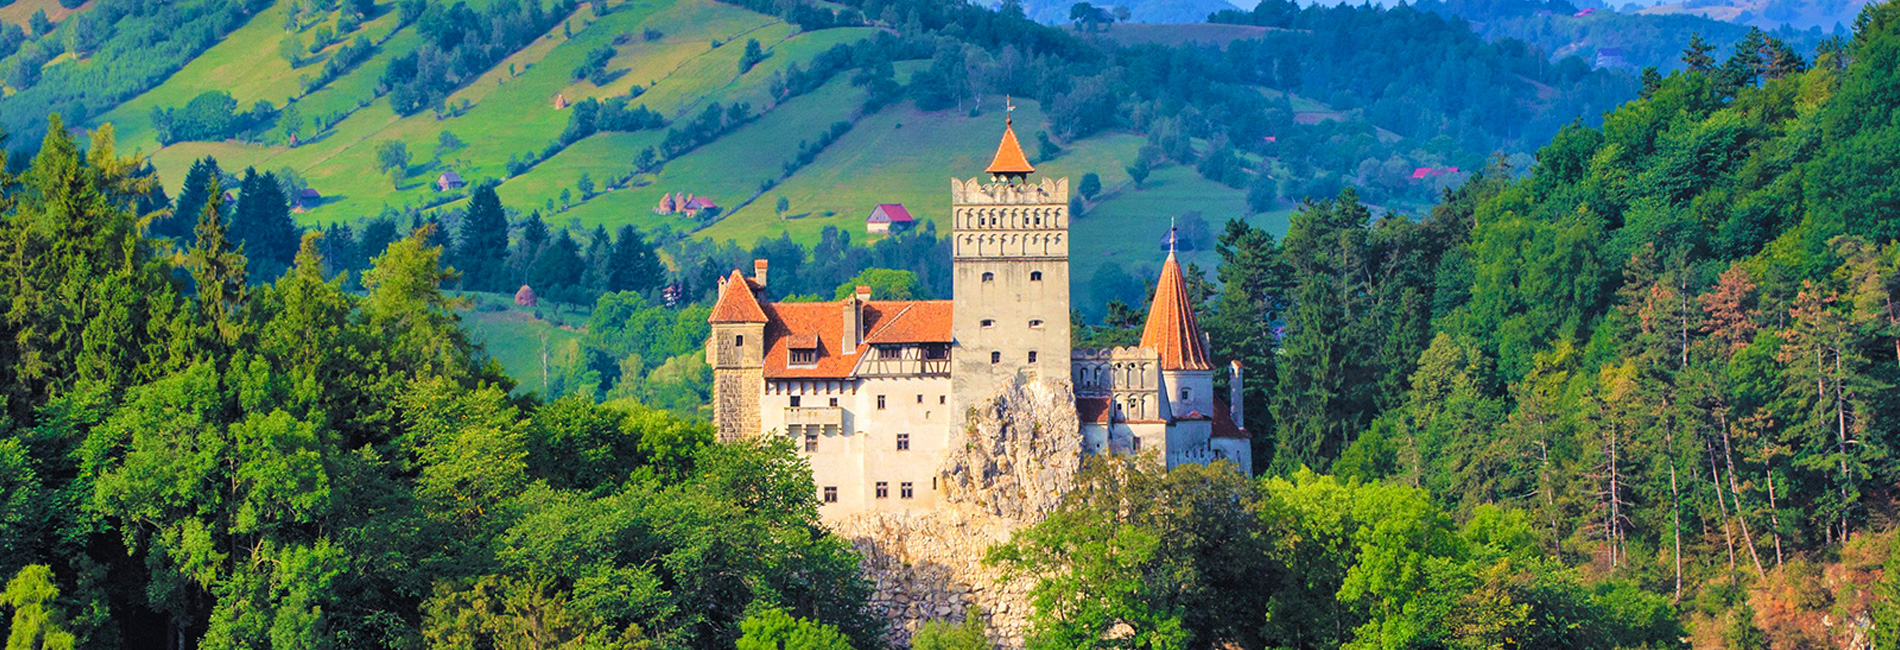 Dracula Castle, Peles Castle and Brasov Day Trip from Bucharest